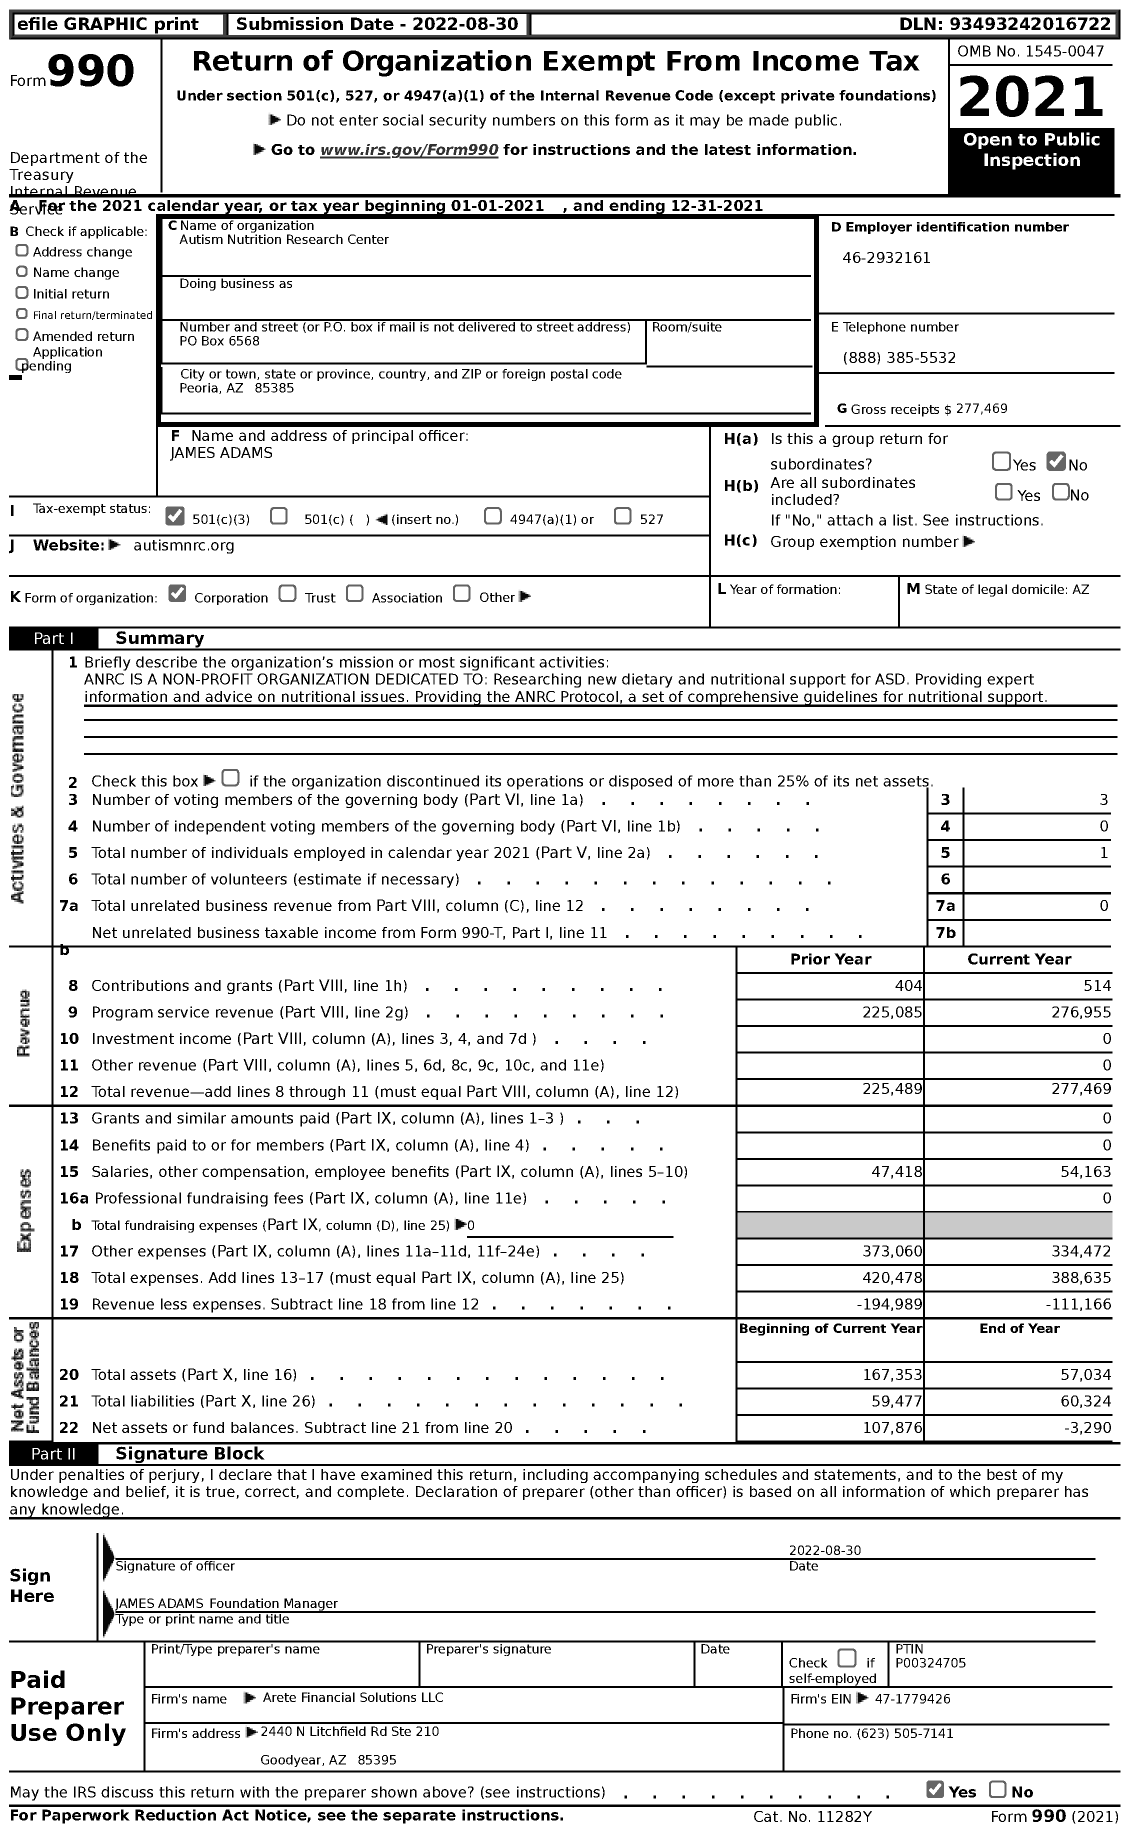 Image of first page of 2021 Form 990 for Autism Nutrition Research Center